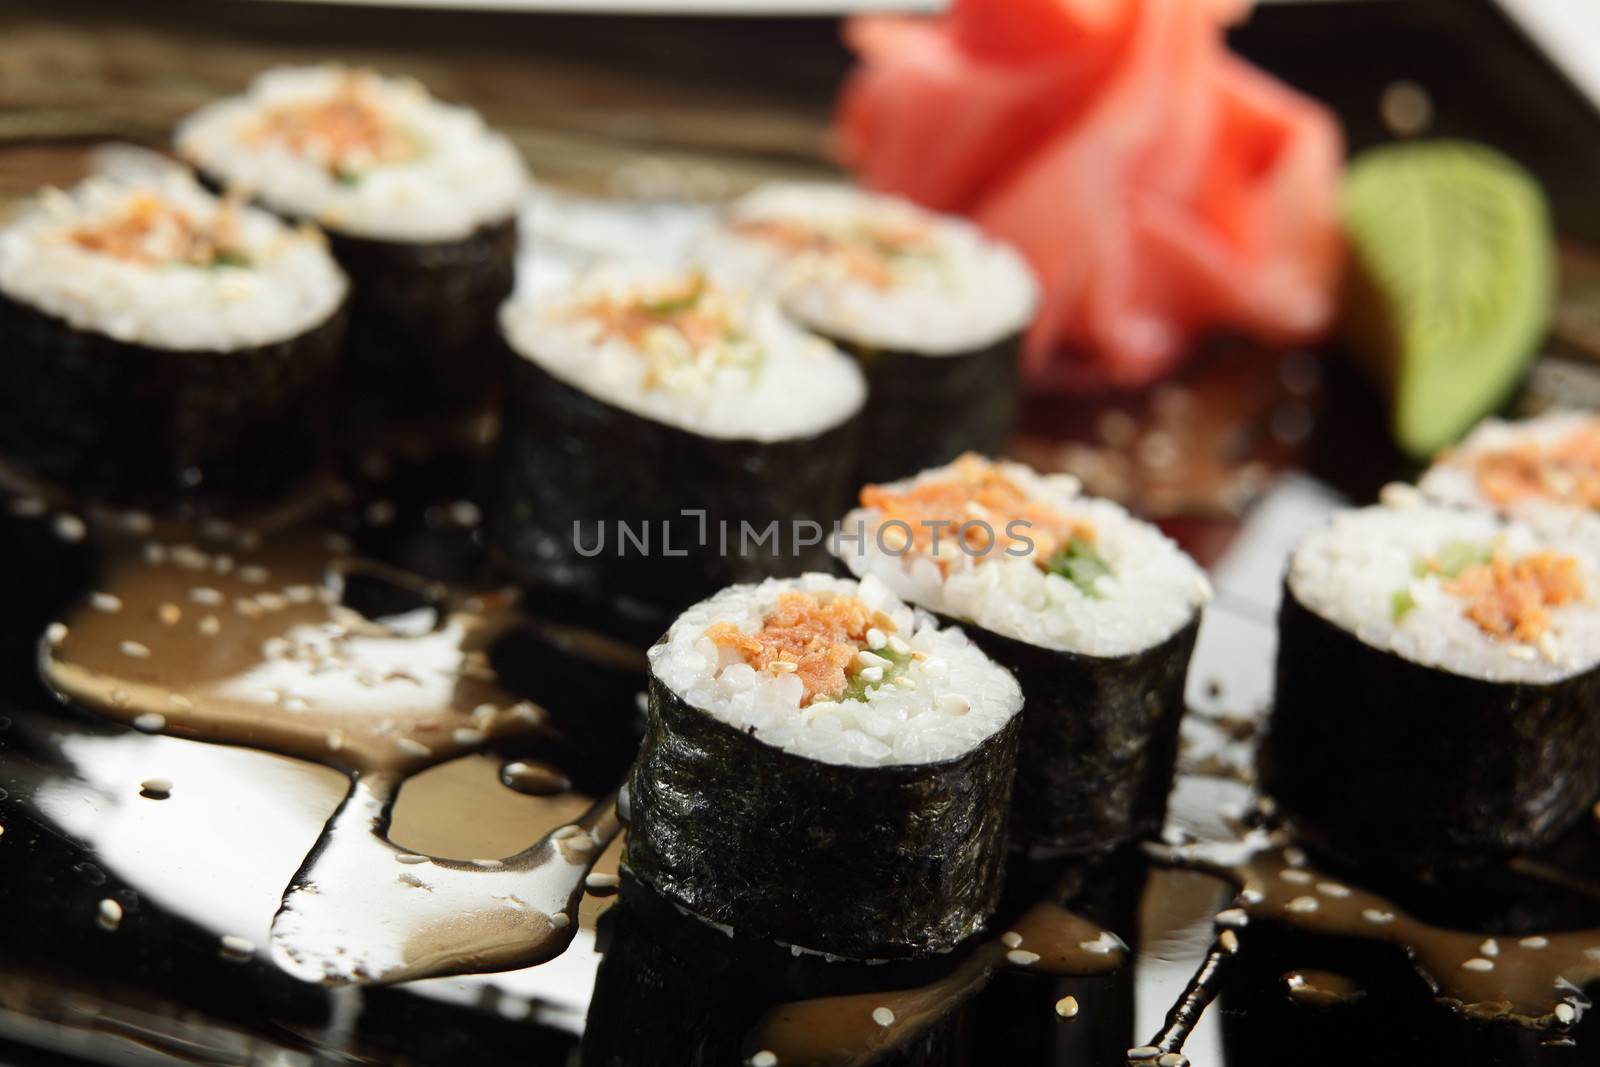 fresh and tasty sushi in black dish by fiphoto